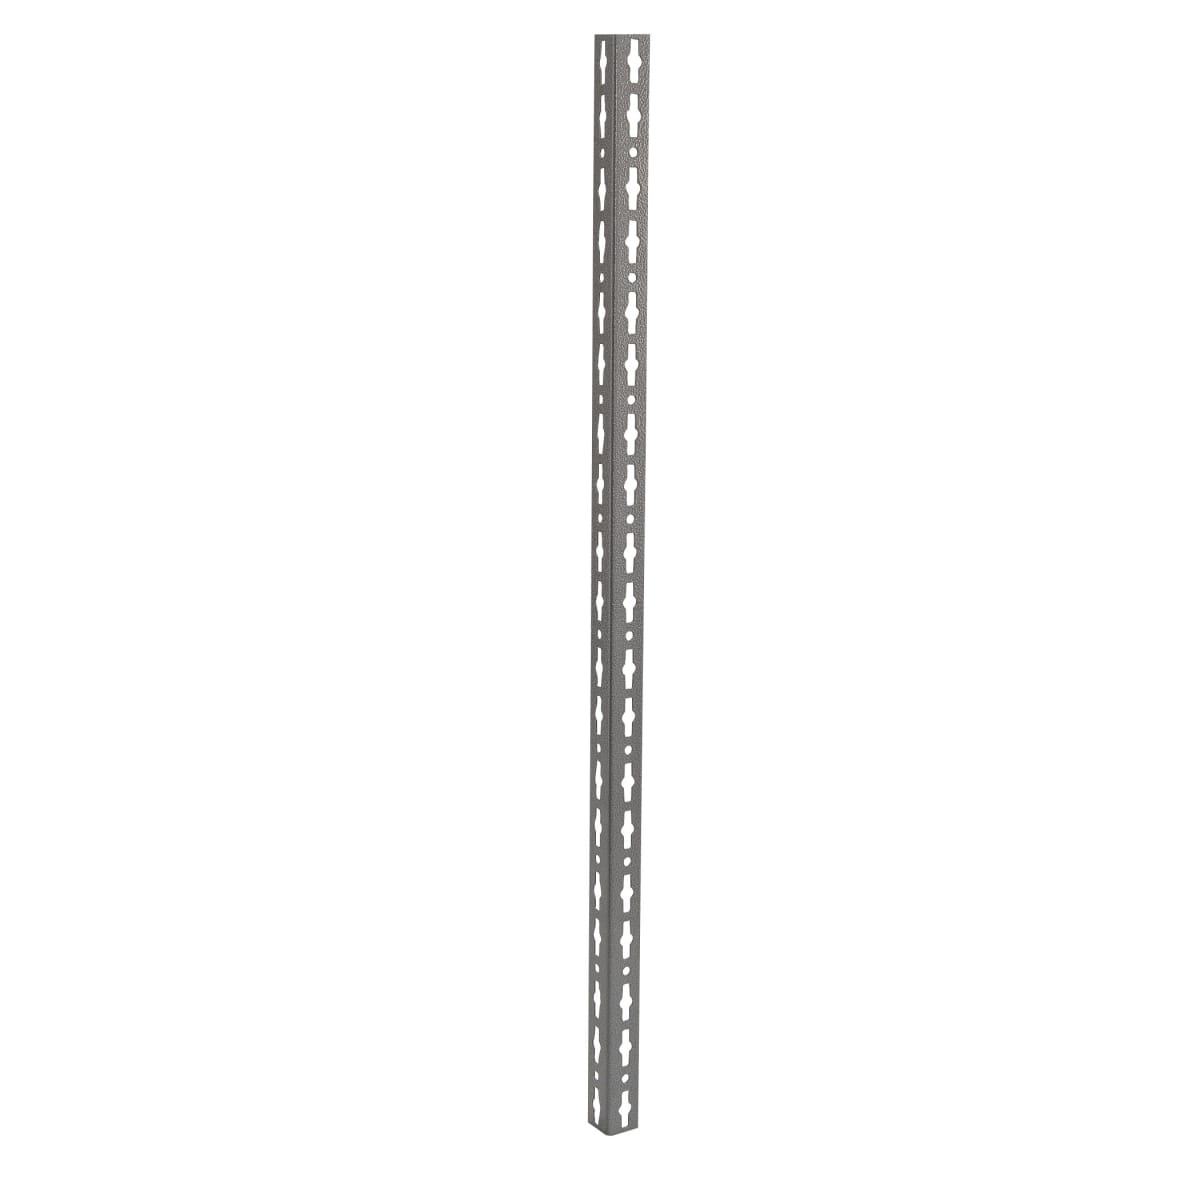 METAL BOLT MOUNTING L4xW4xH200CM GREY WITH BOLTS